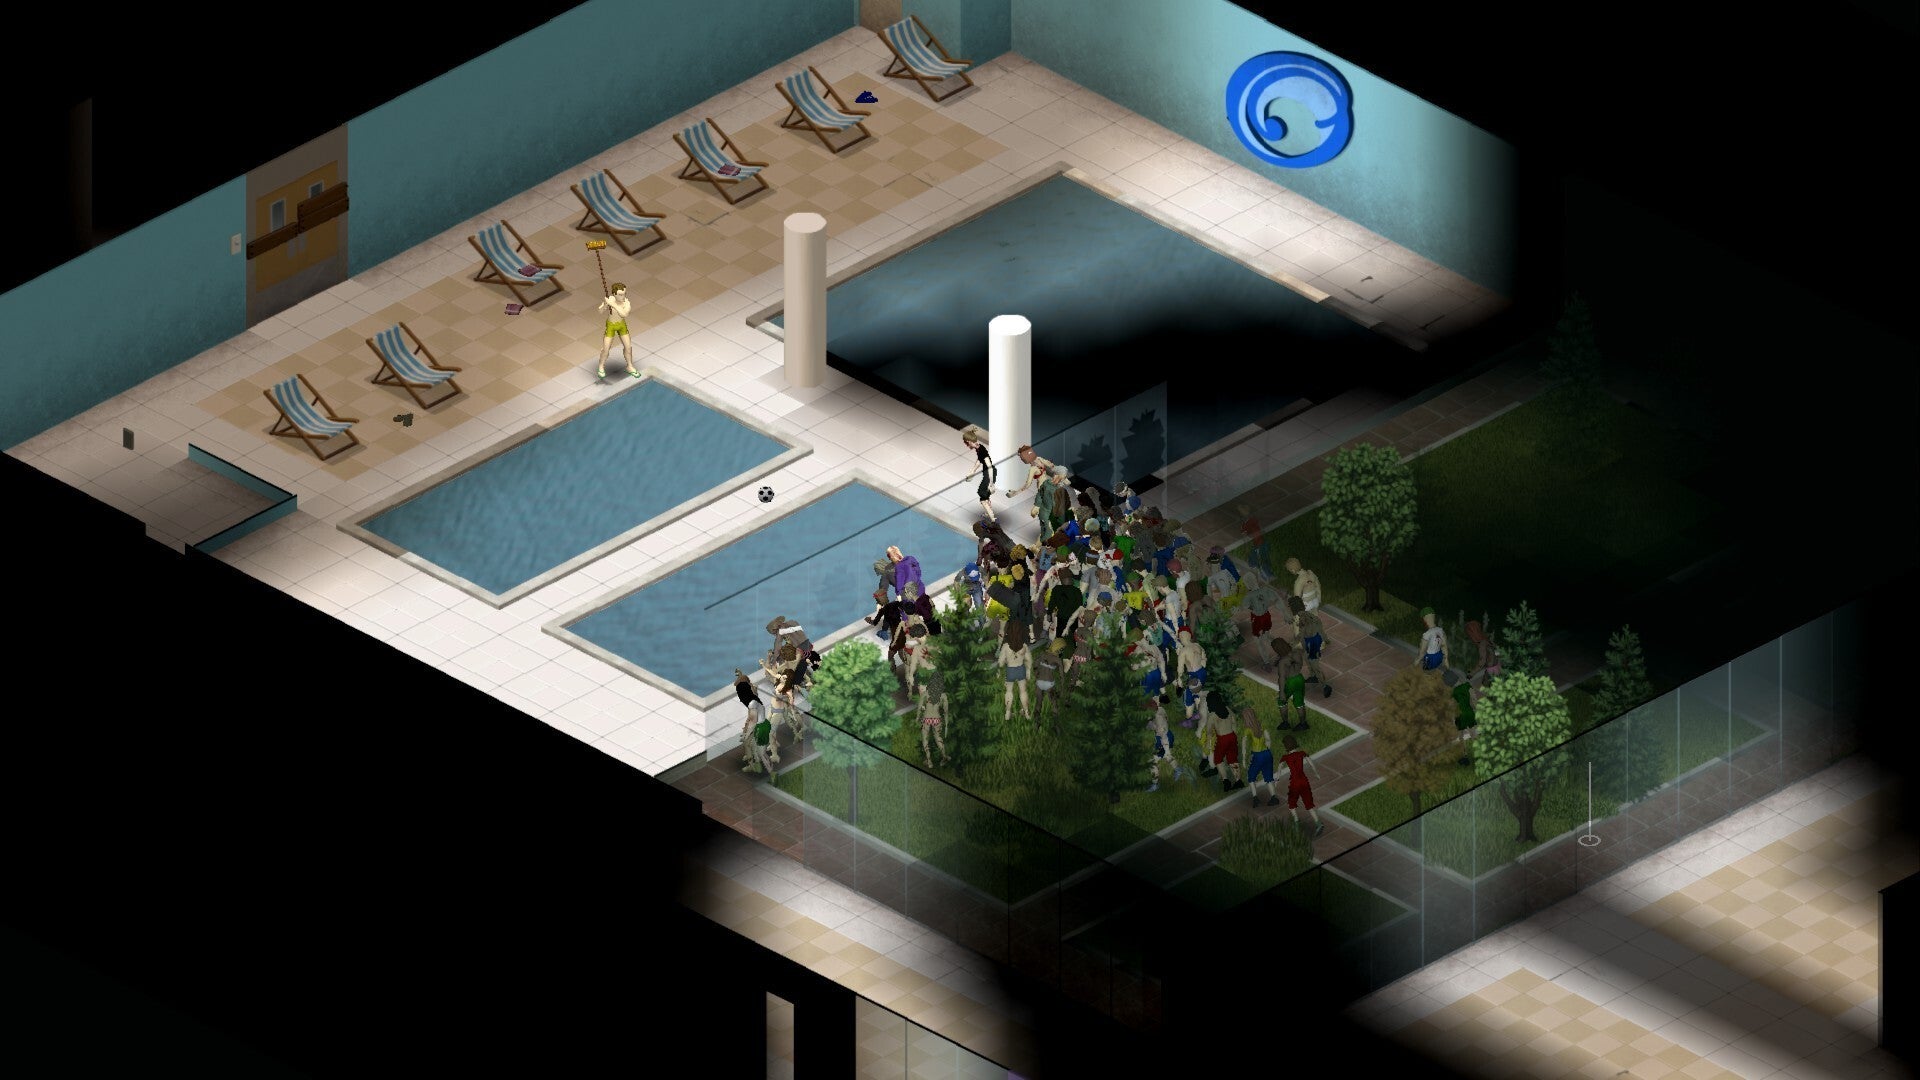 game Project Zomboid player fending off an incoming horde with a sweeping brush at a swimming pool